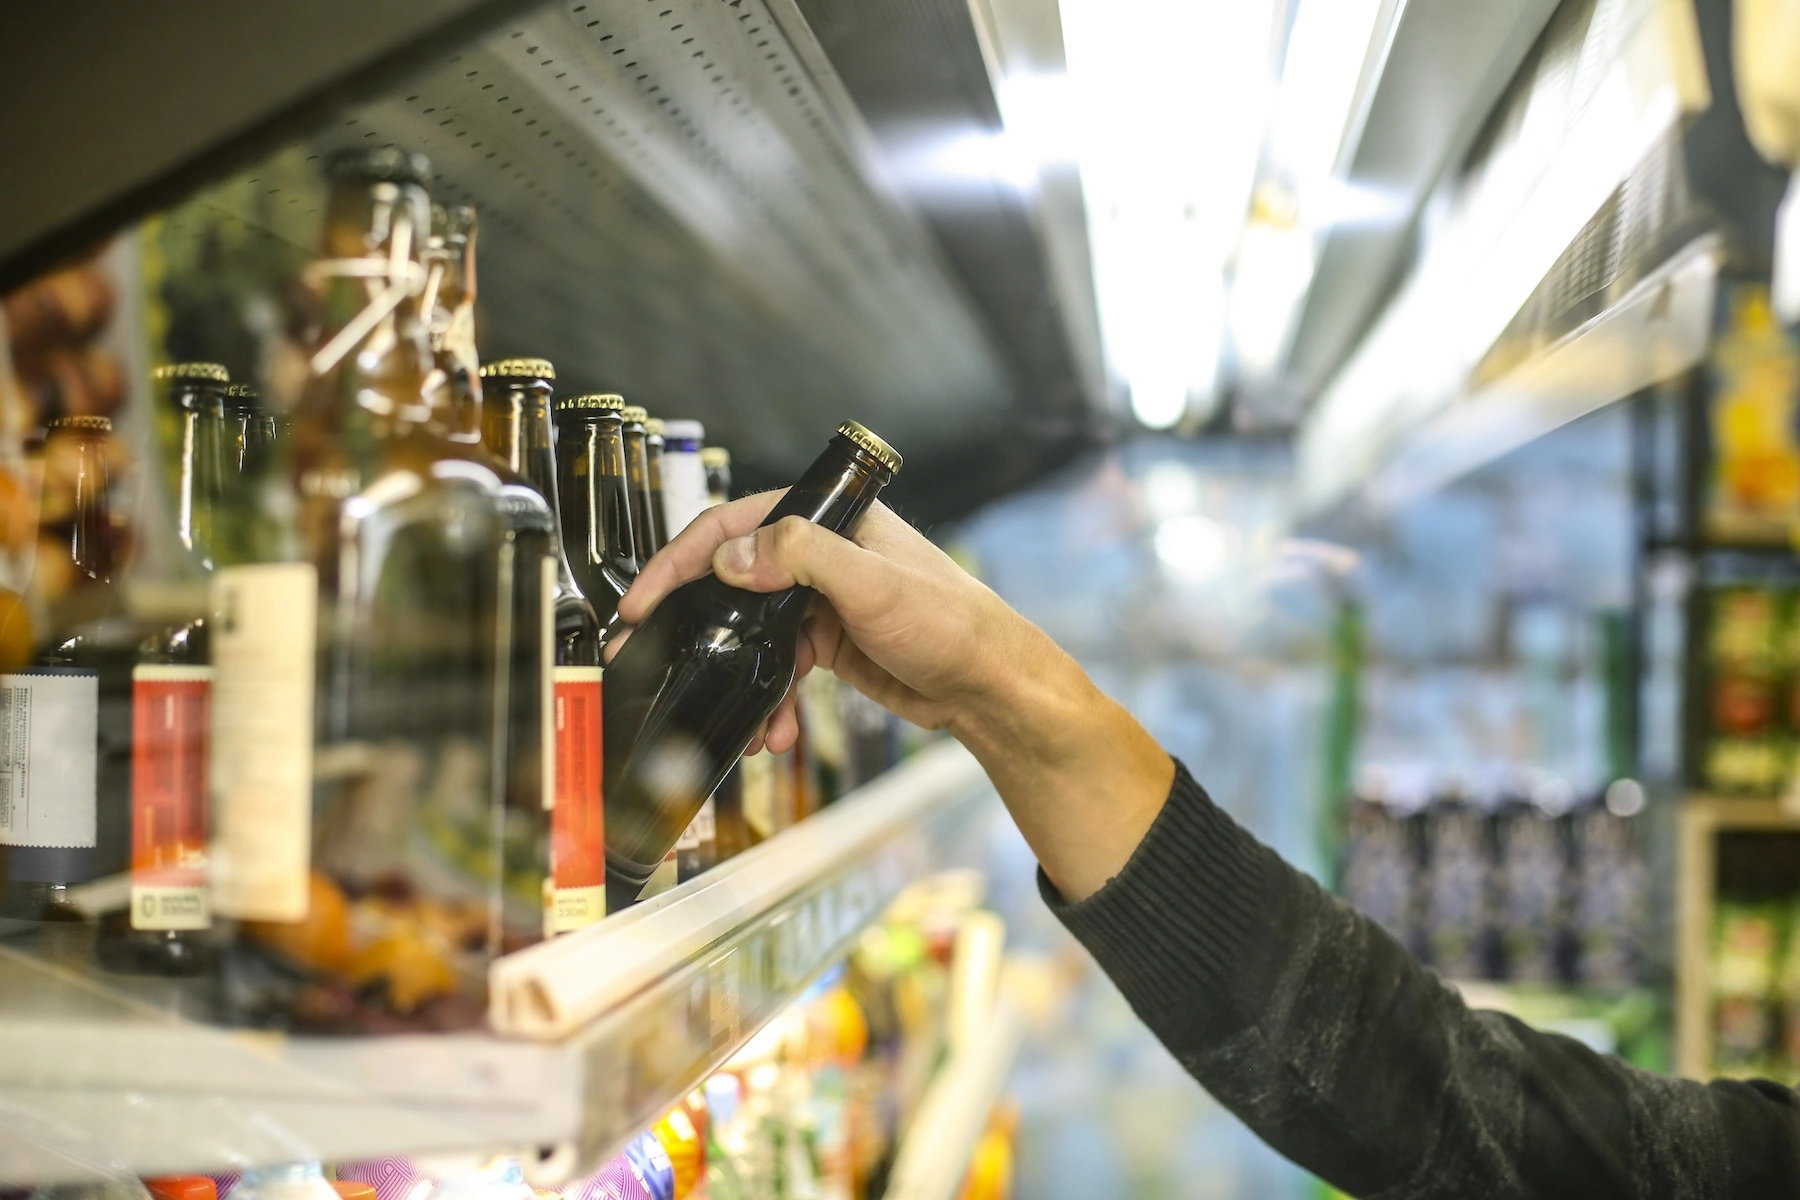 Close-up of a man's arm as he reaches for a single bottle of beer on a refrigerated store shelf